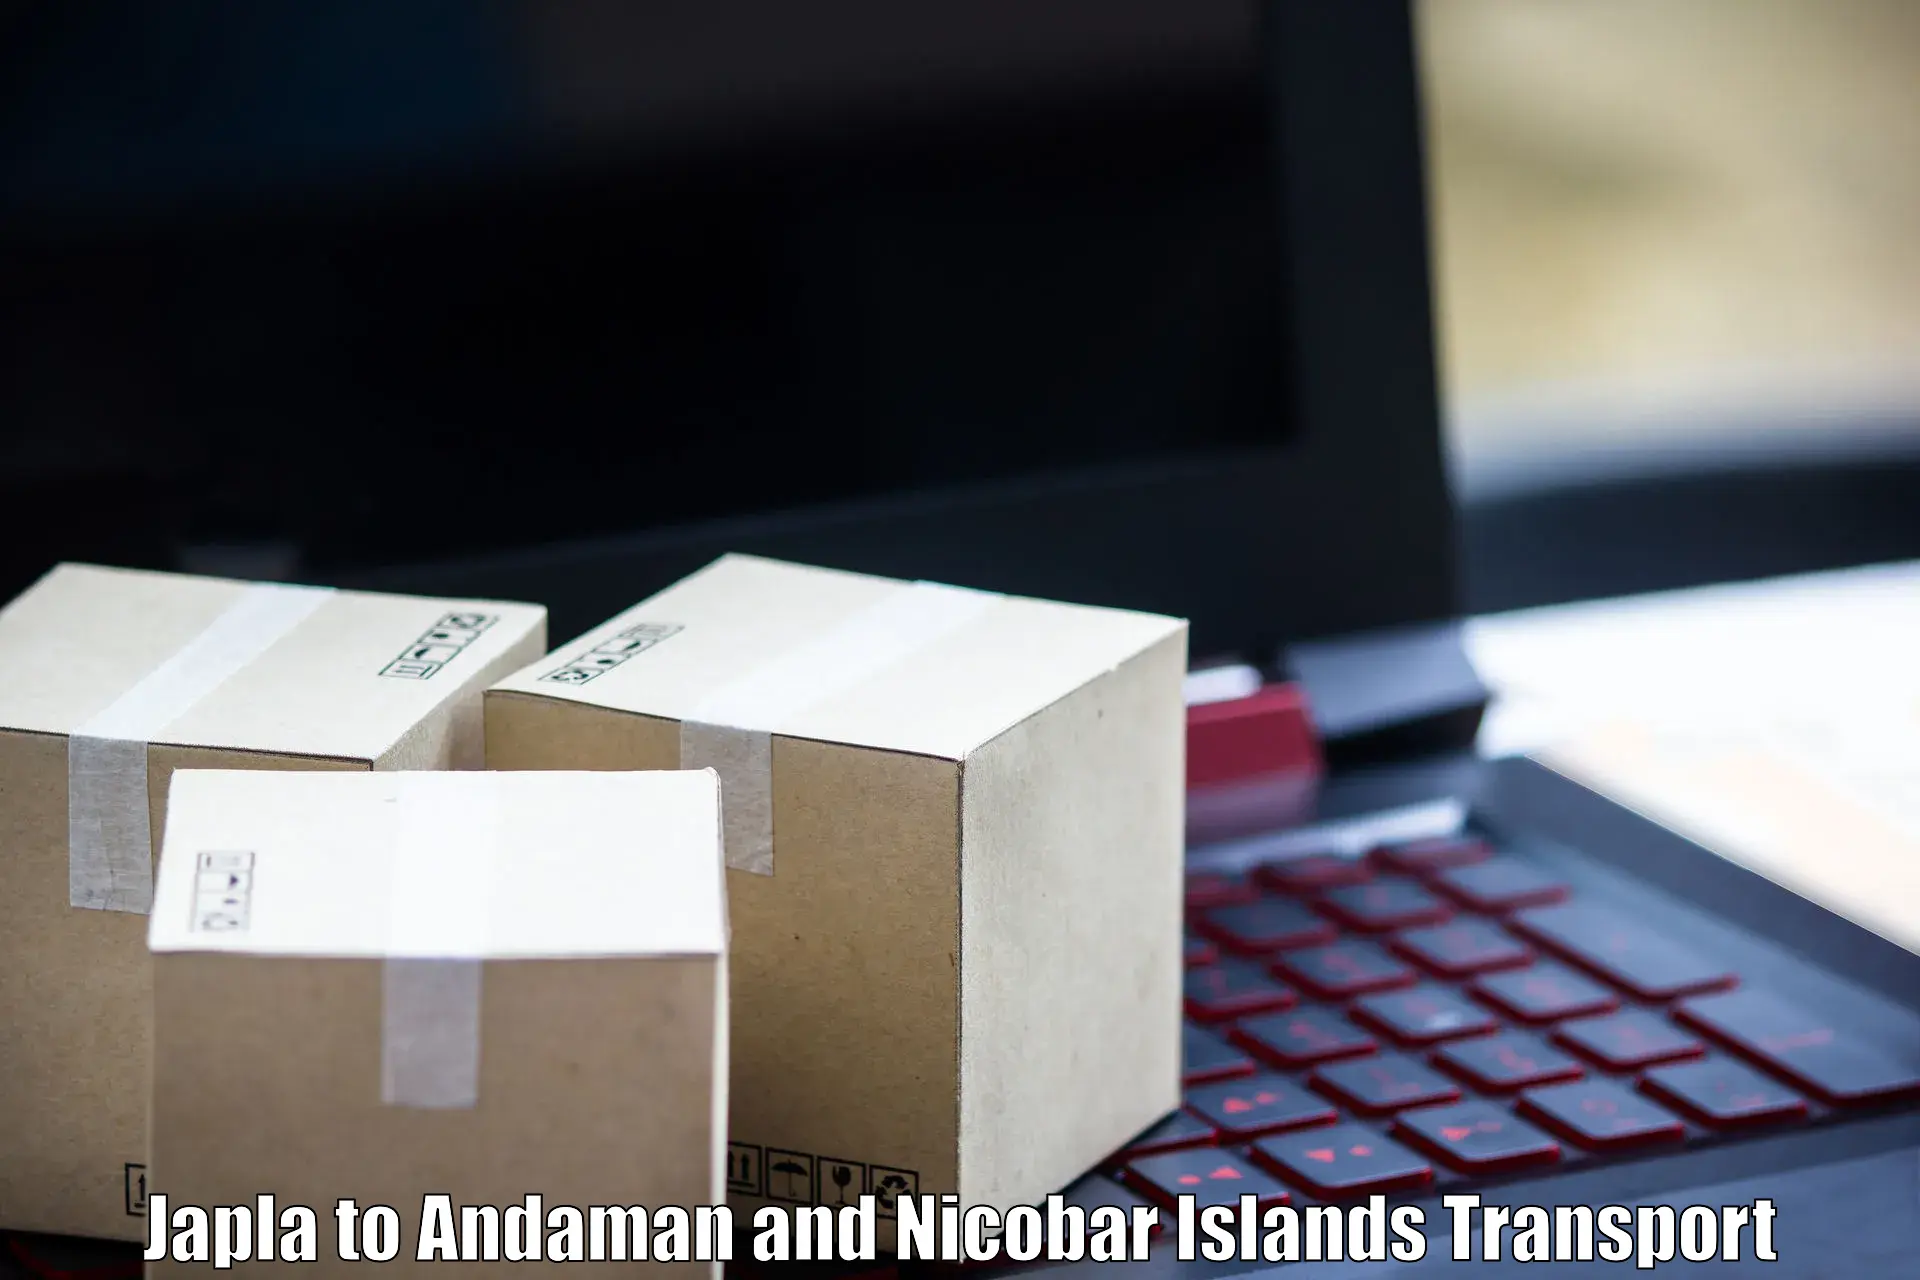 Container transport service Japla to Andaman and Nicobar Islands